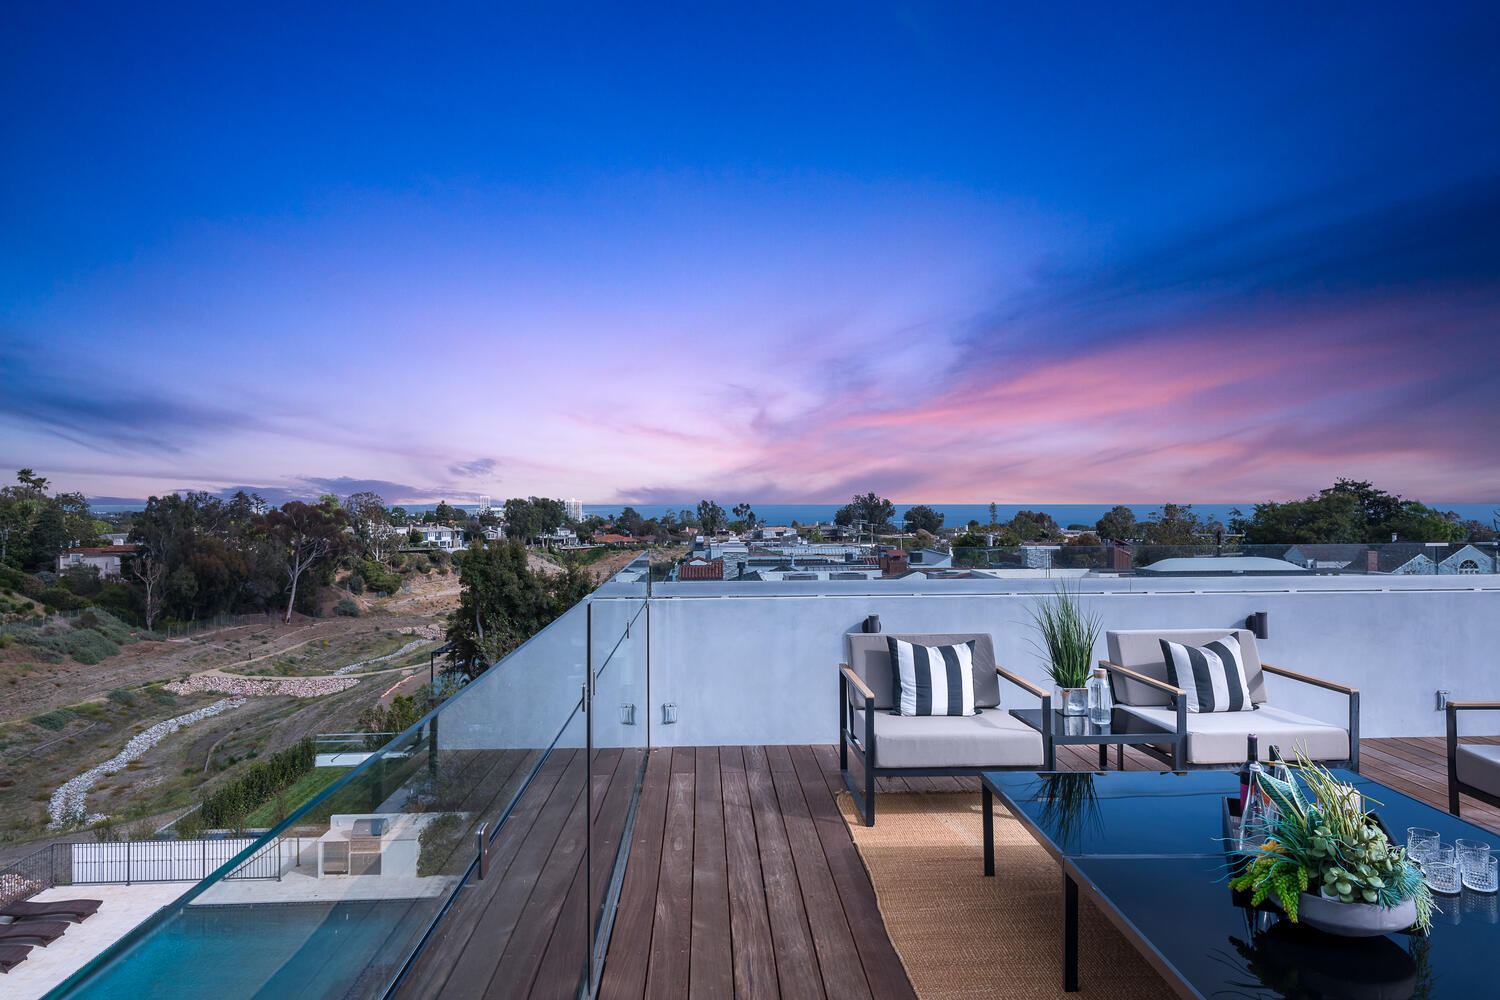 View of rooftop entertaining space and ocean in the distance at dusk